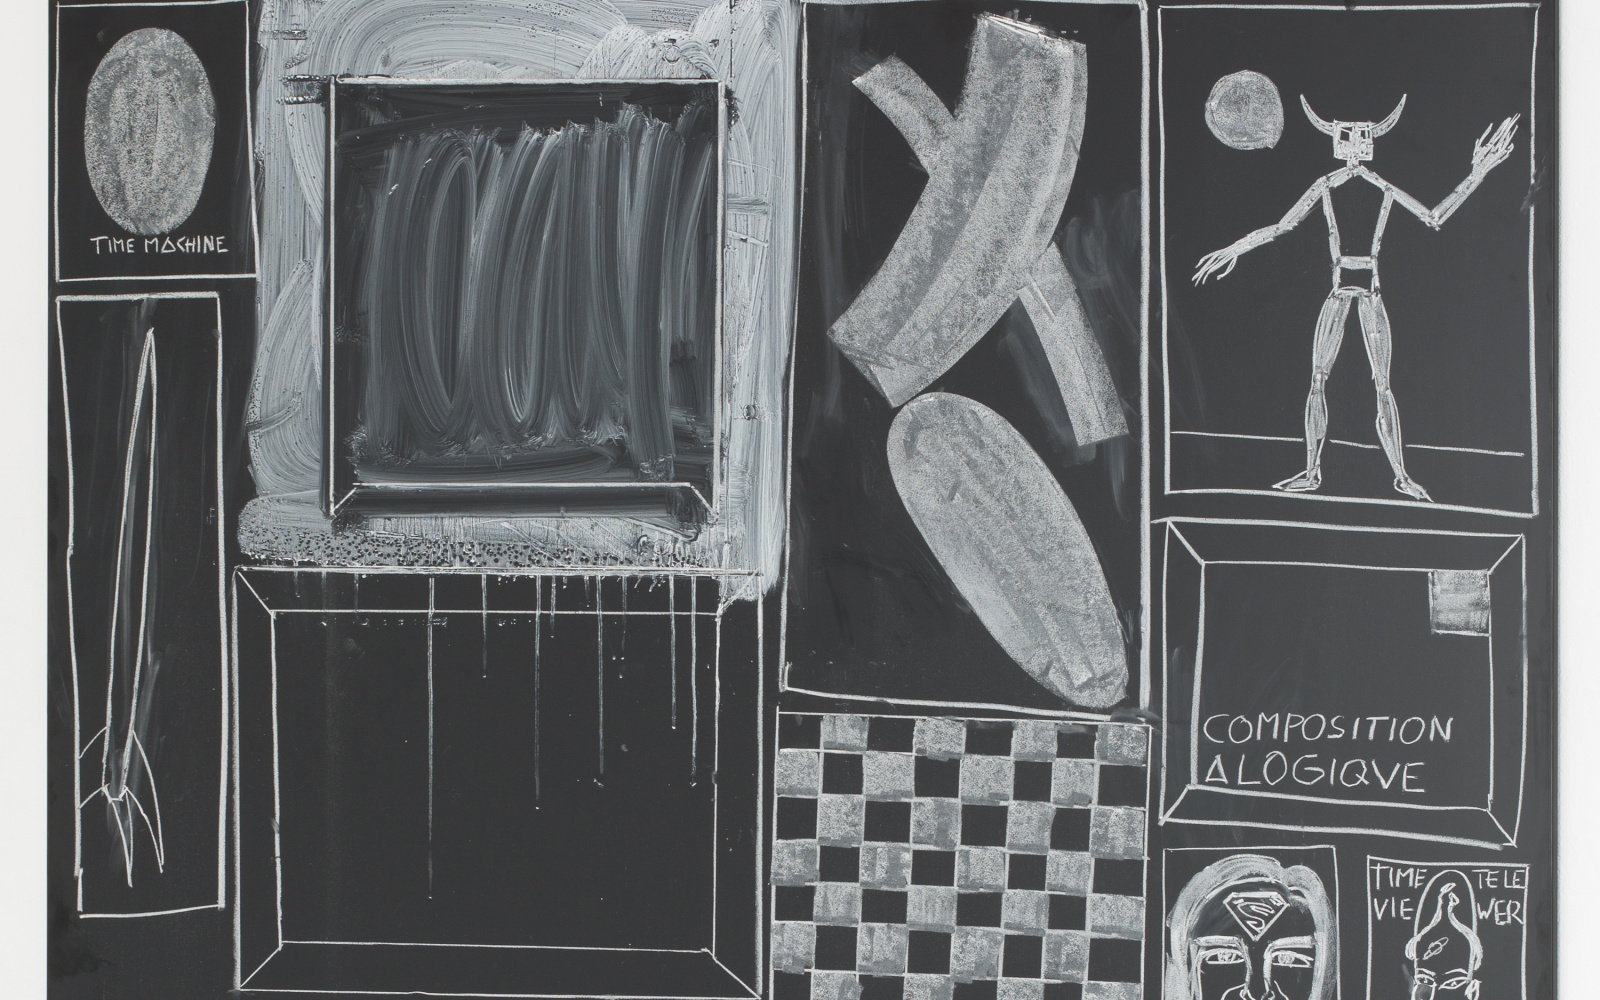 Panel by the artist Andy Hope 1930: White drawings on black ground